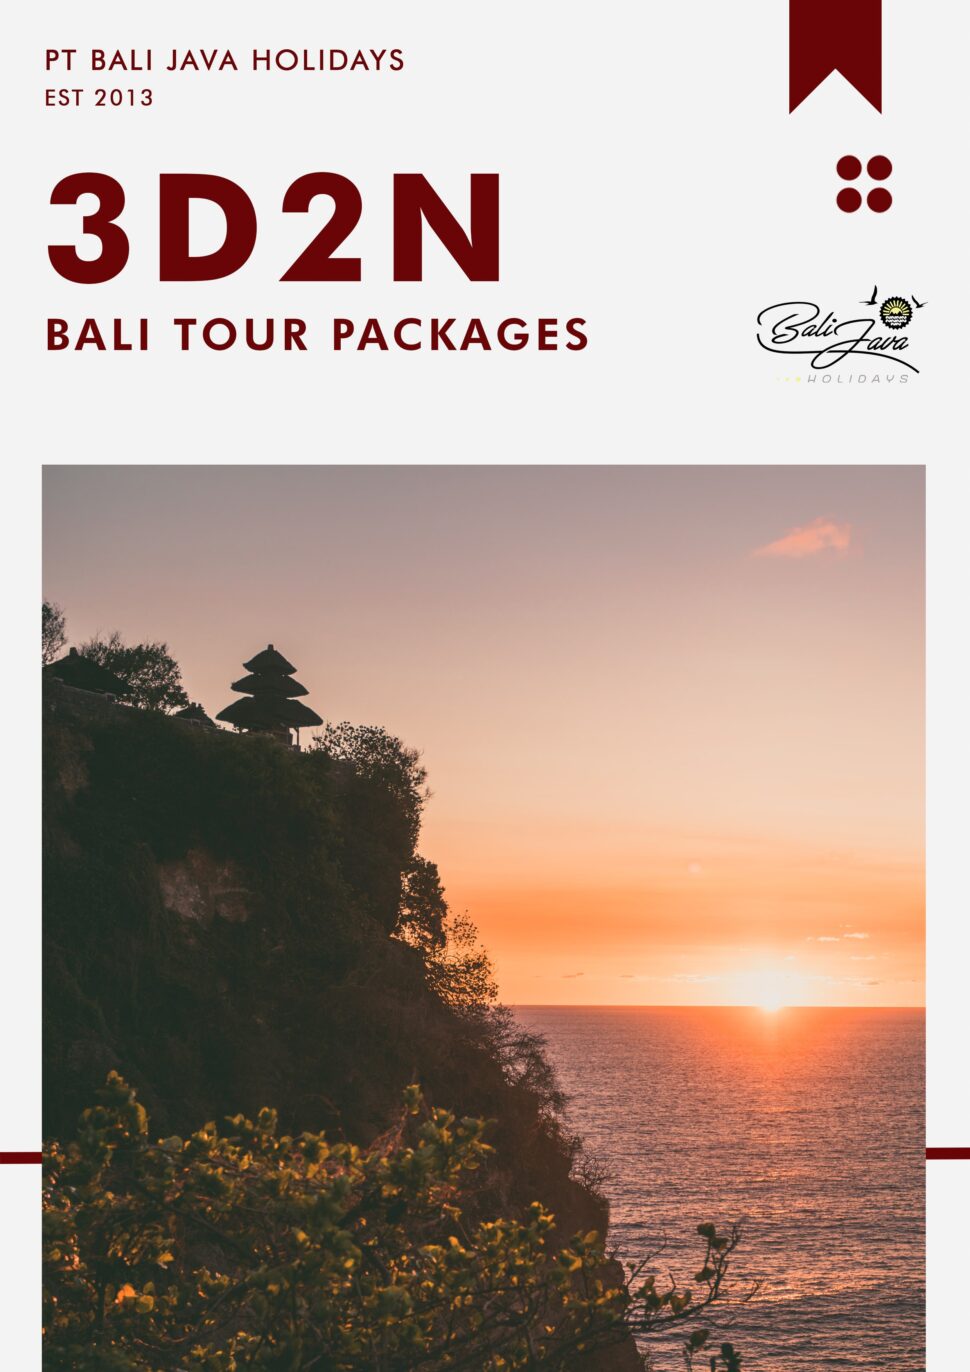 3D2N Bali Tour Package Experience Bali with the Best Tour Packages